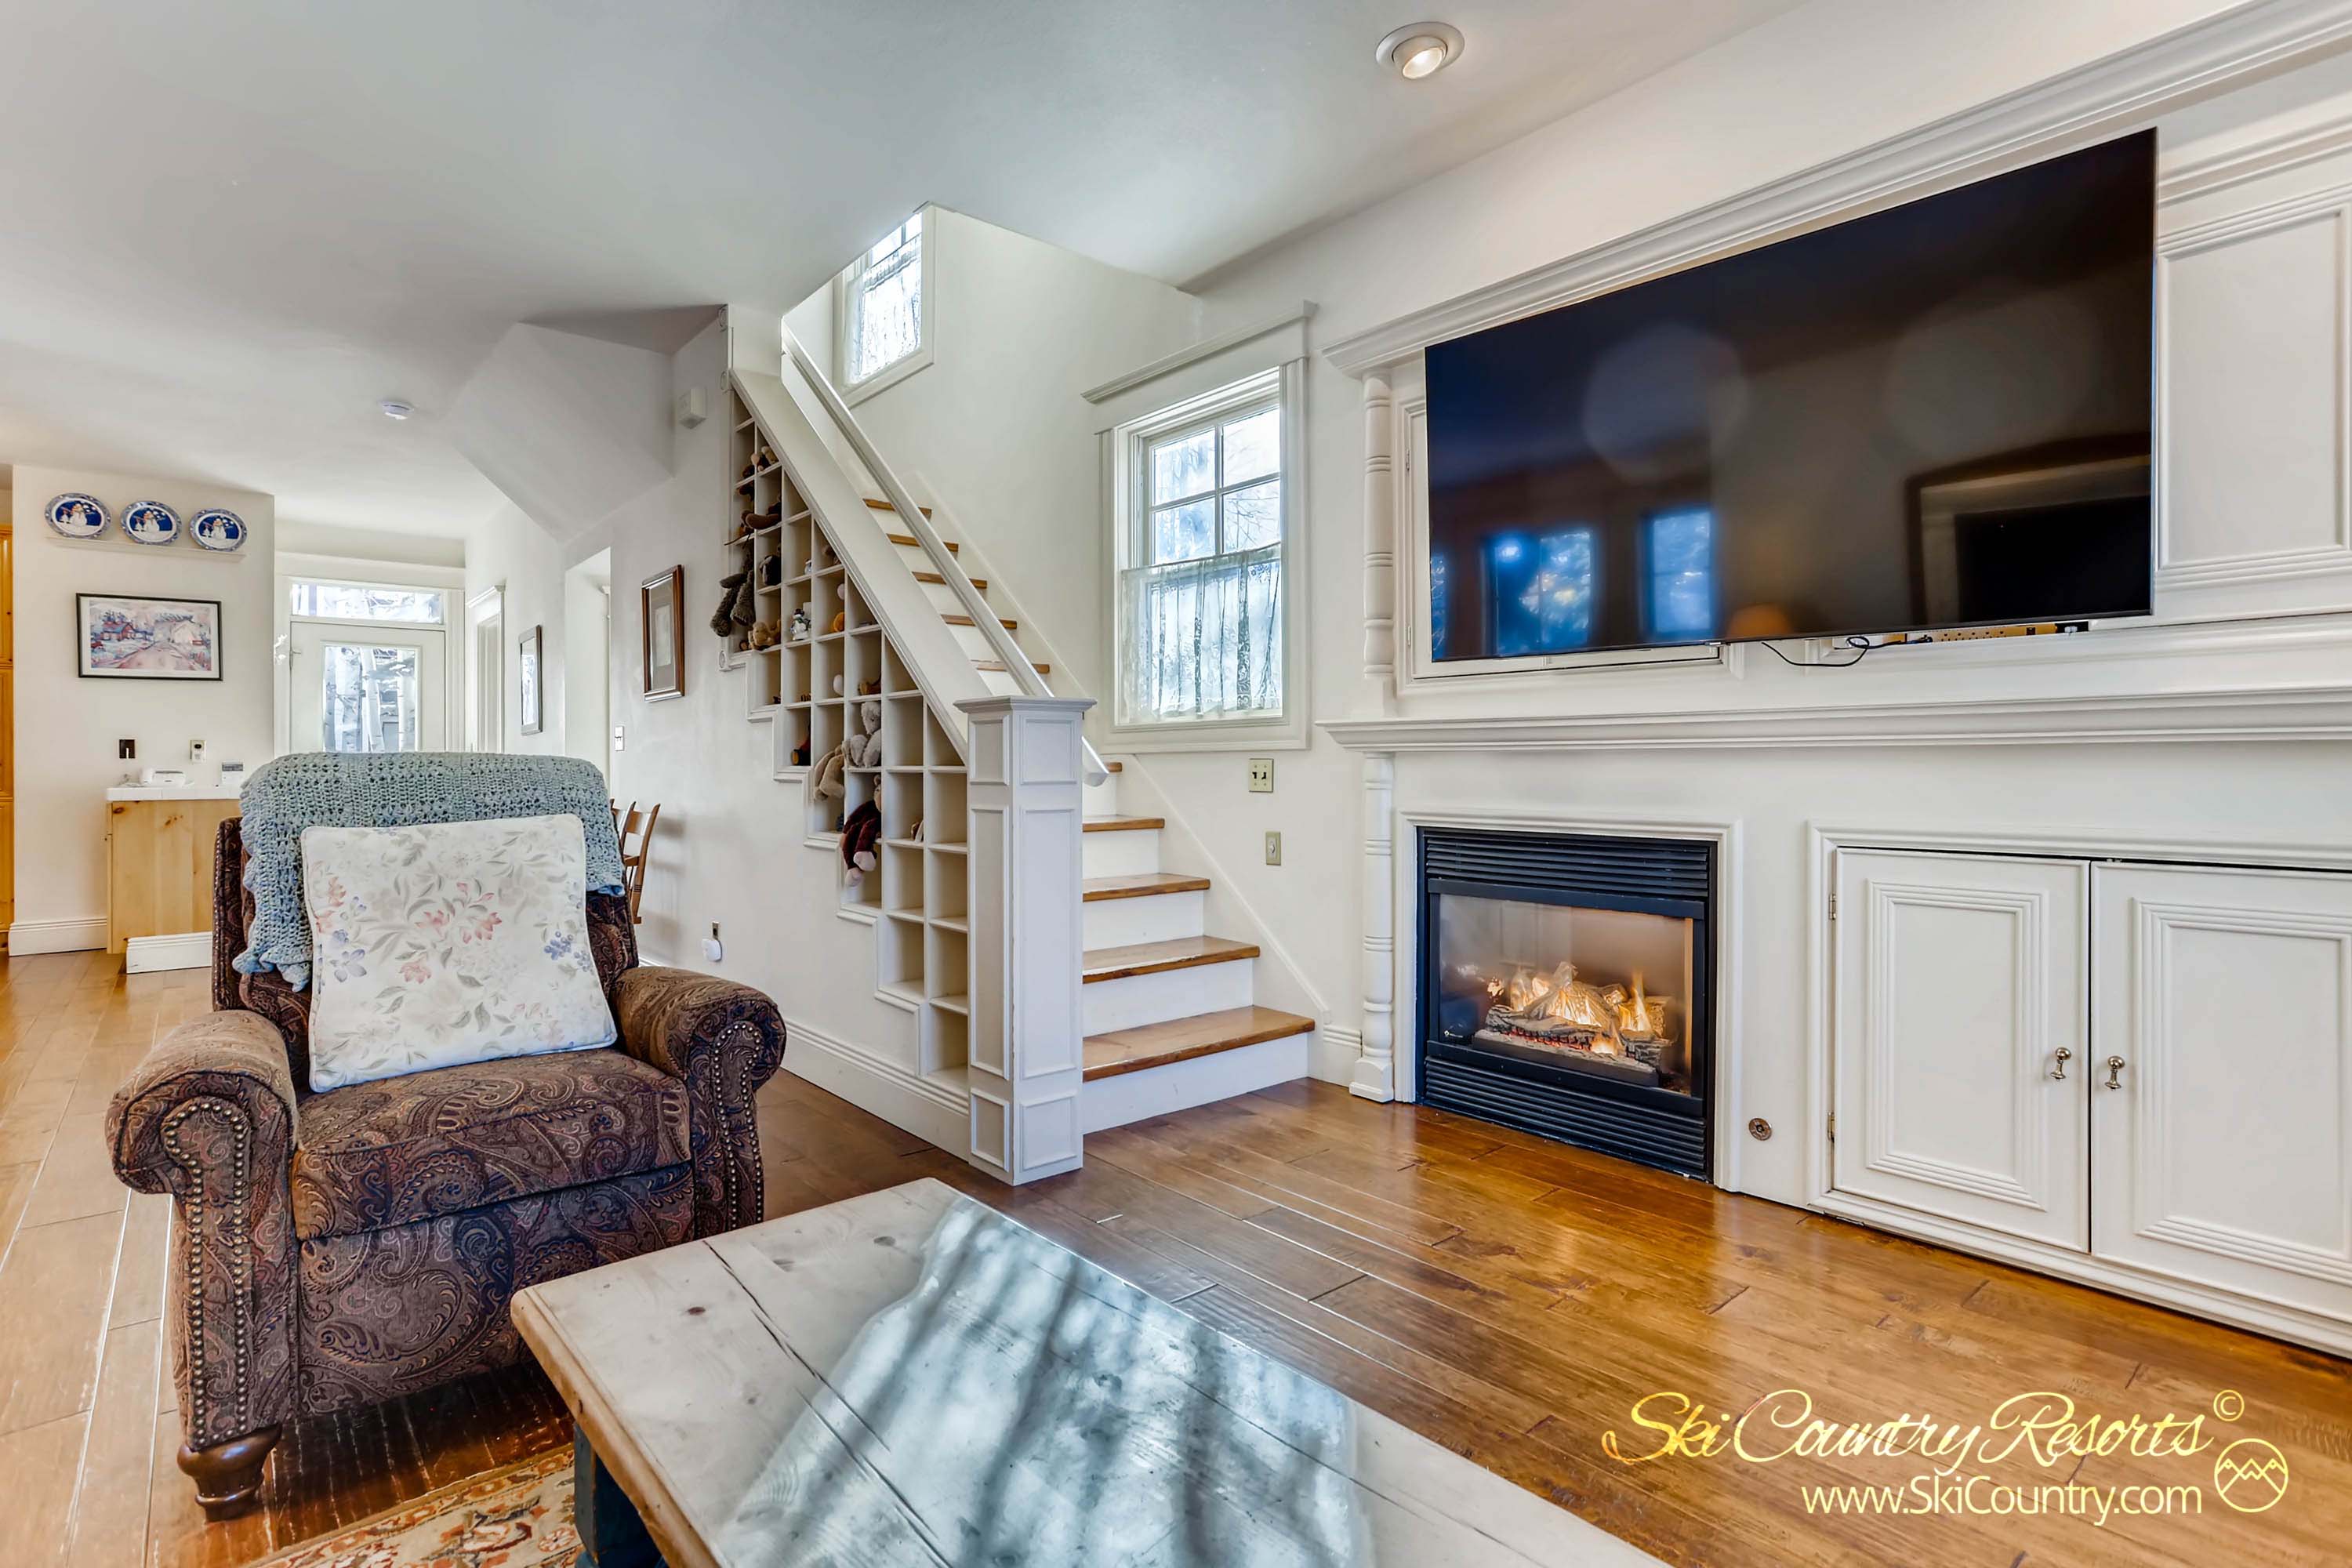 Cozy up in the main level living room with a cozy gas fireplace, elegant hardwood floors, and abundant natural light. Ample space/storage is available for your mountain gear via the built in nooks along the stairway.